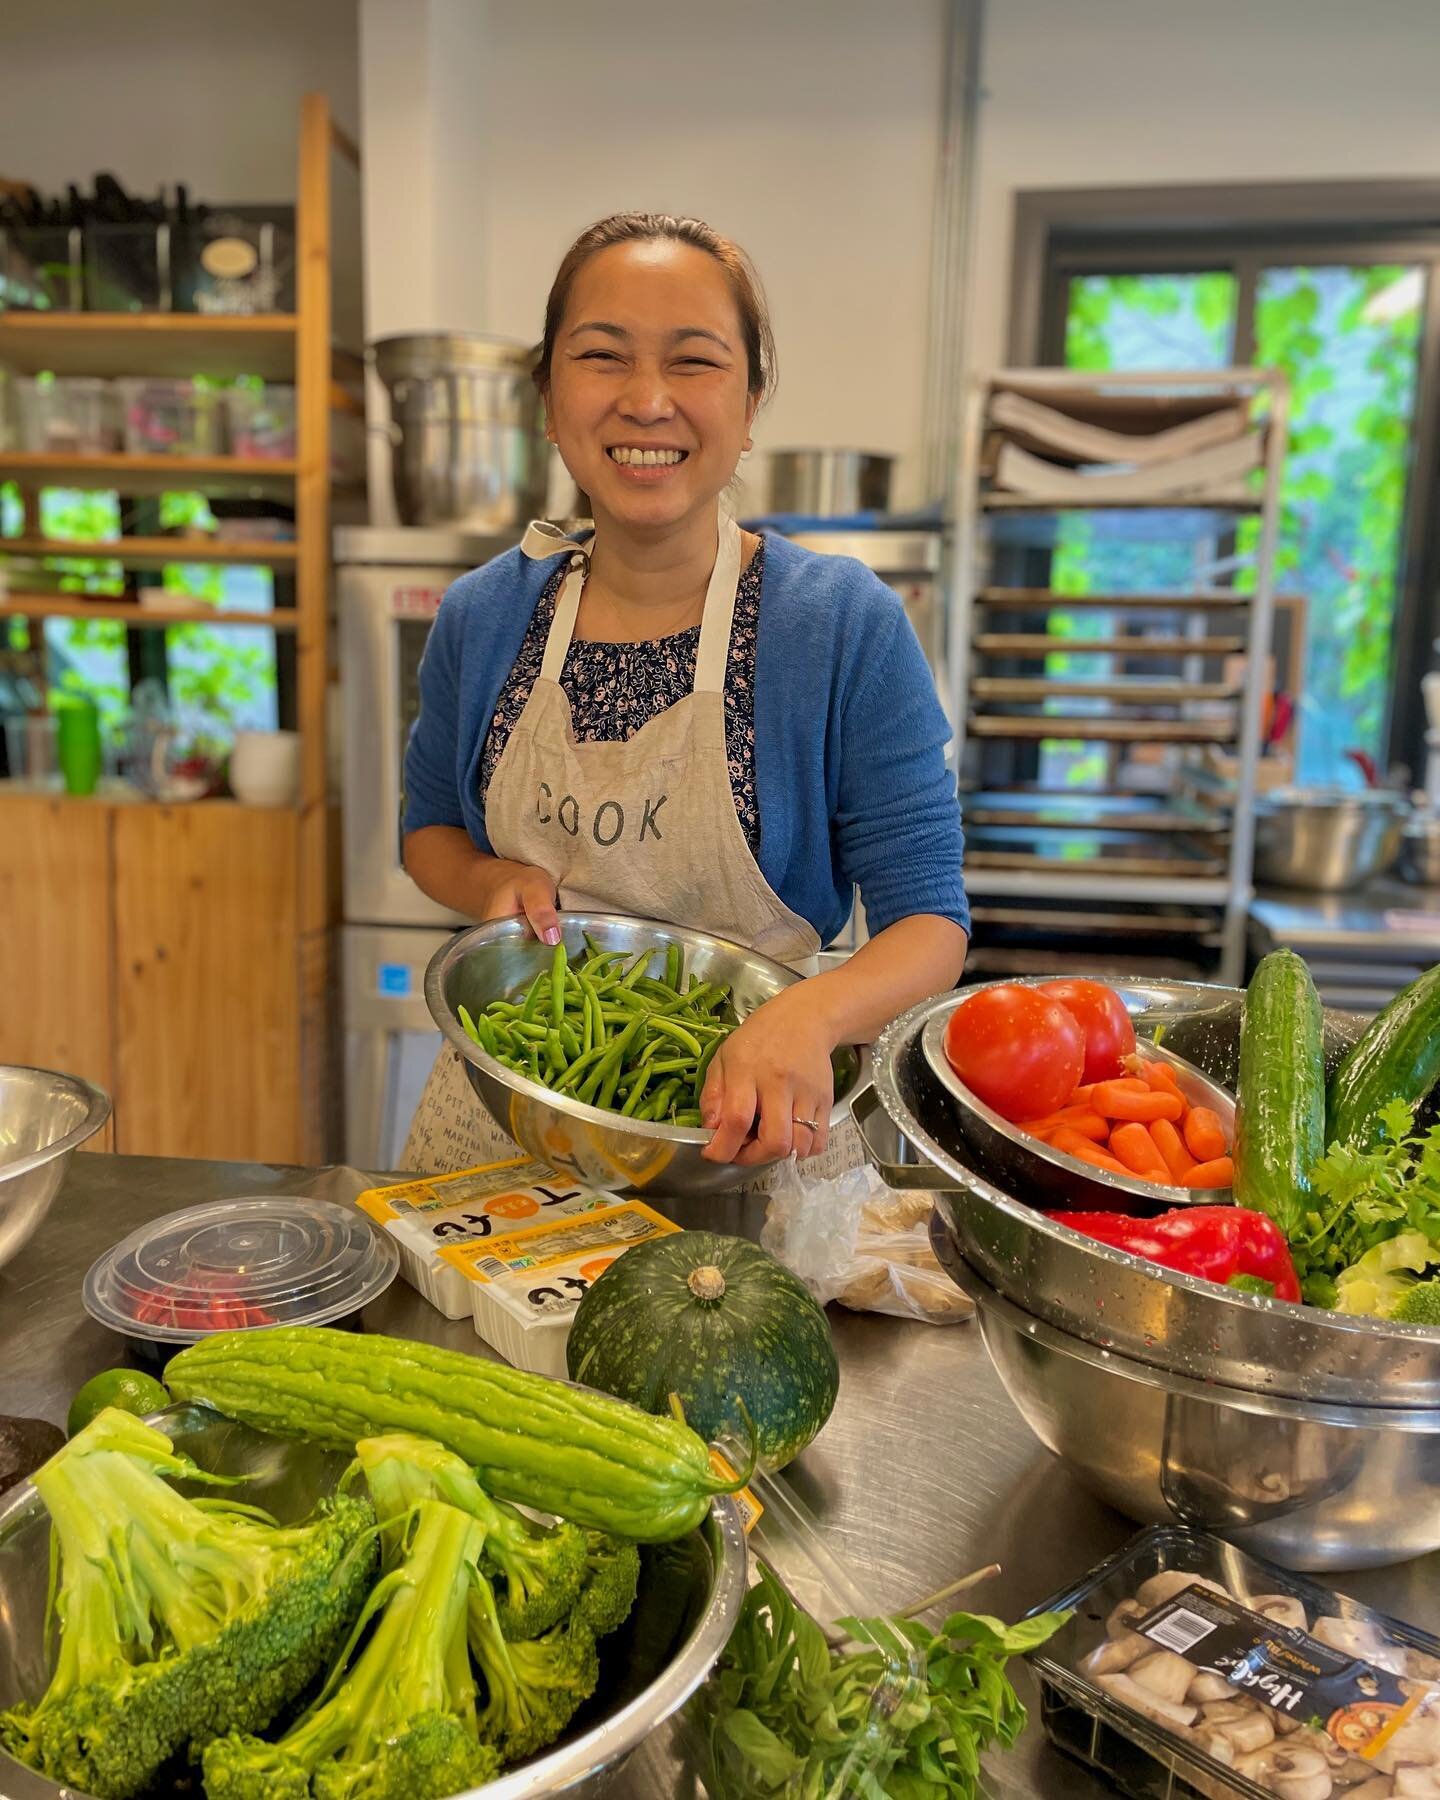 Hey there! How was your weekend? Ours was fantastic thanks to Pla and the Longfellow Garden Club parents who came over to our Schoolhouse to cook some mouthwatering Thai dishes. Who says parents can't have fun too? 😉🍴🌶️ 
#weekendvibes #cookingadve